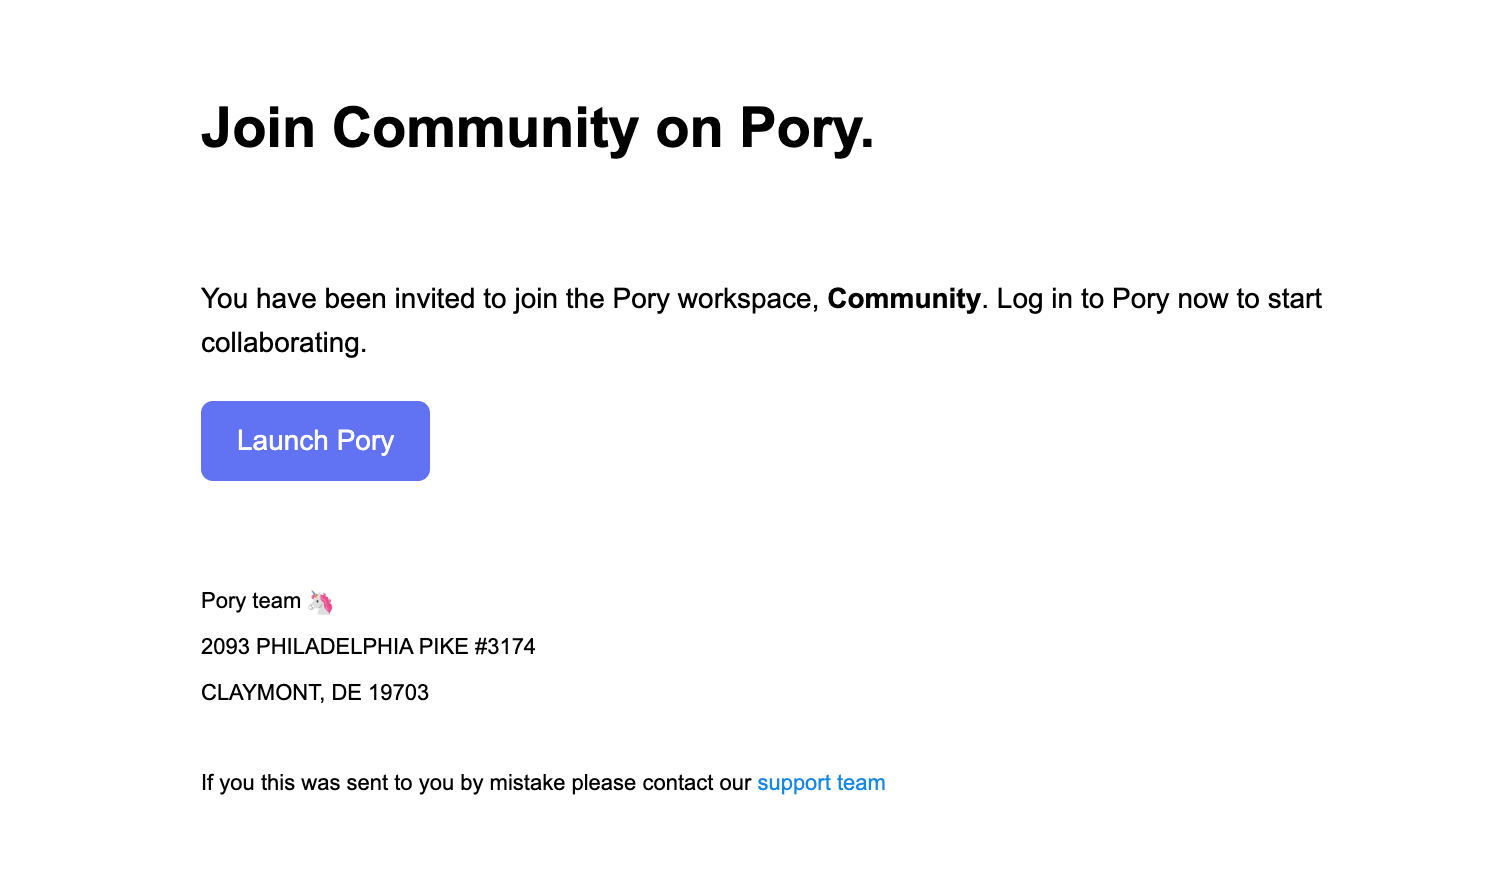 Email invitation to join a Pory workspace